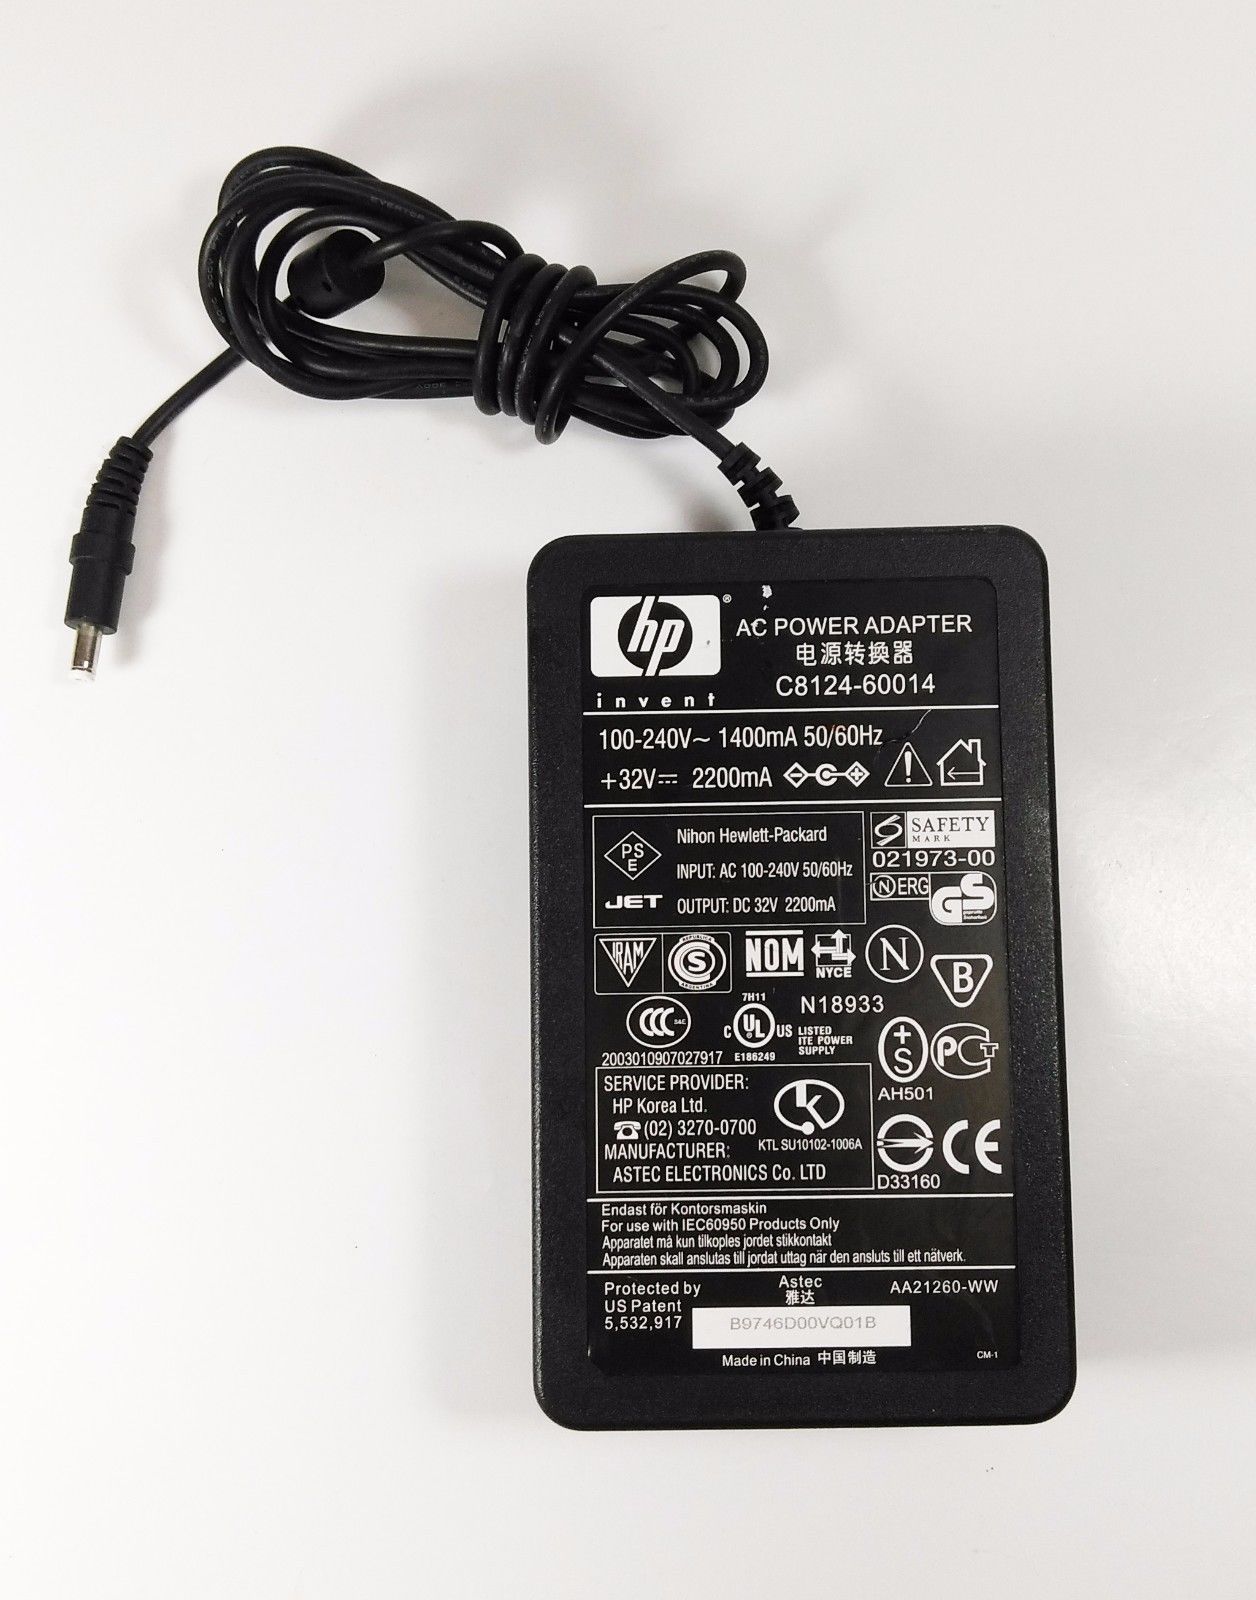 32V 2200mA 70W HP DeskJet C9026A Printer AC Power Adapter Charger